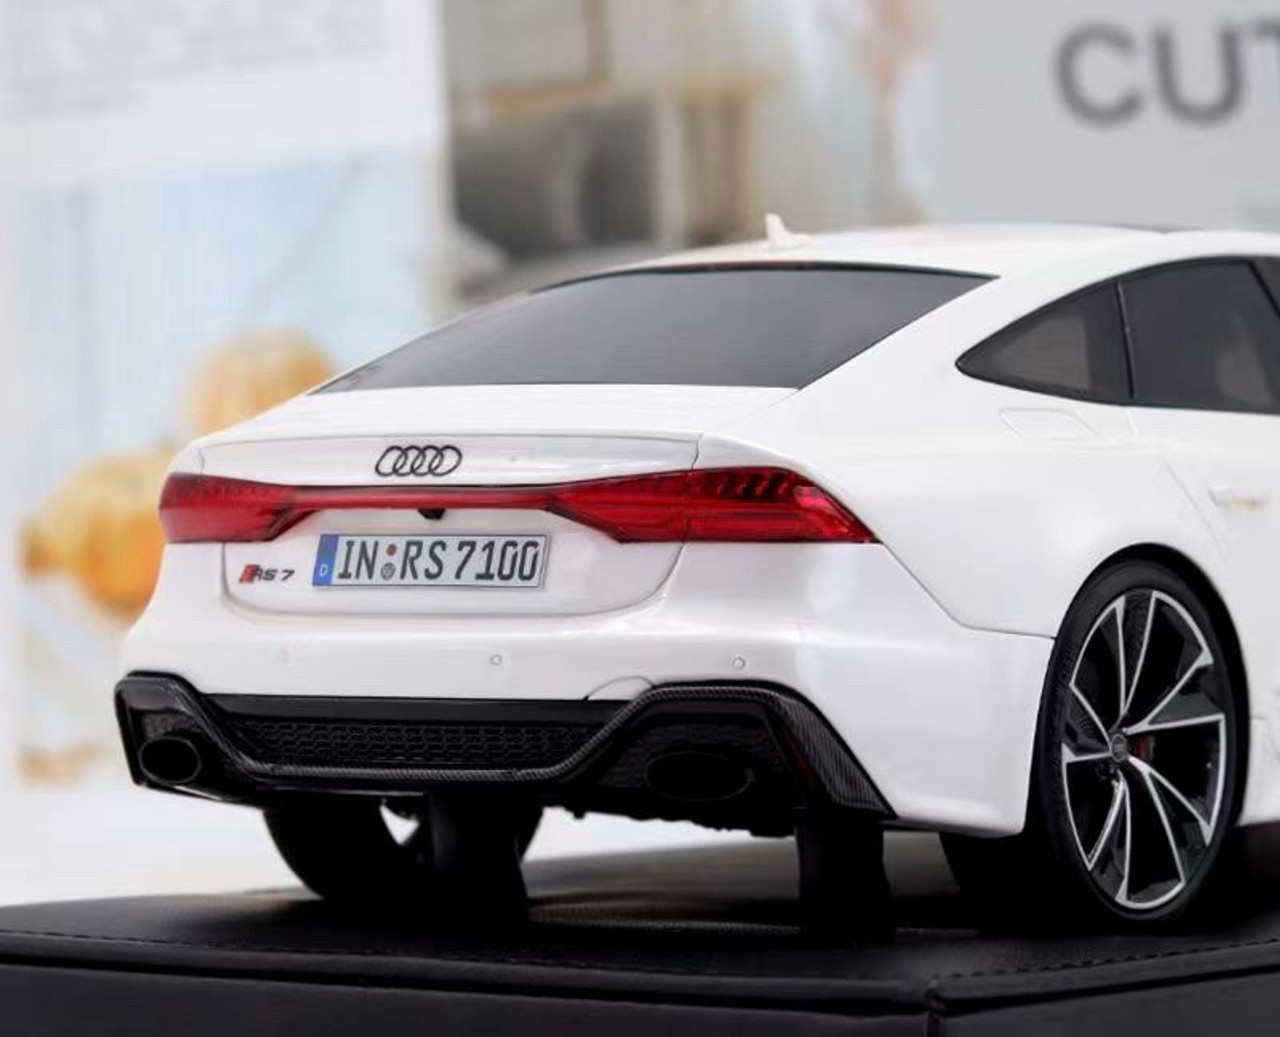 1/18 Motorhelix 2020 Audi RS7 C8 Sportback (Pearl White) Resin Car Model Limited 99 Pieces